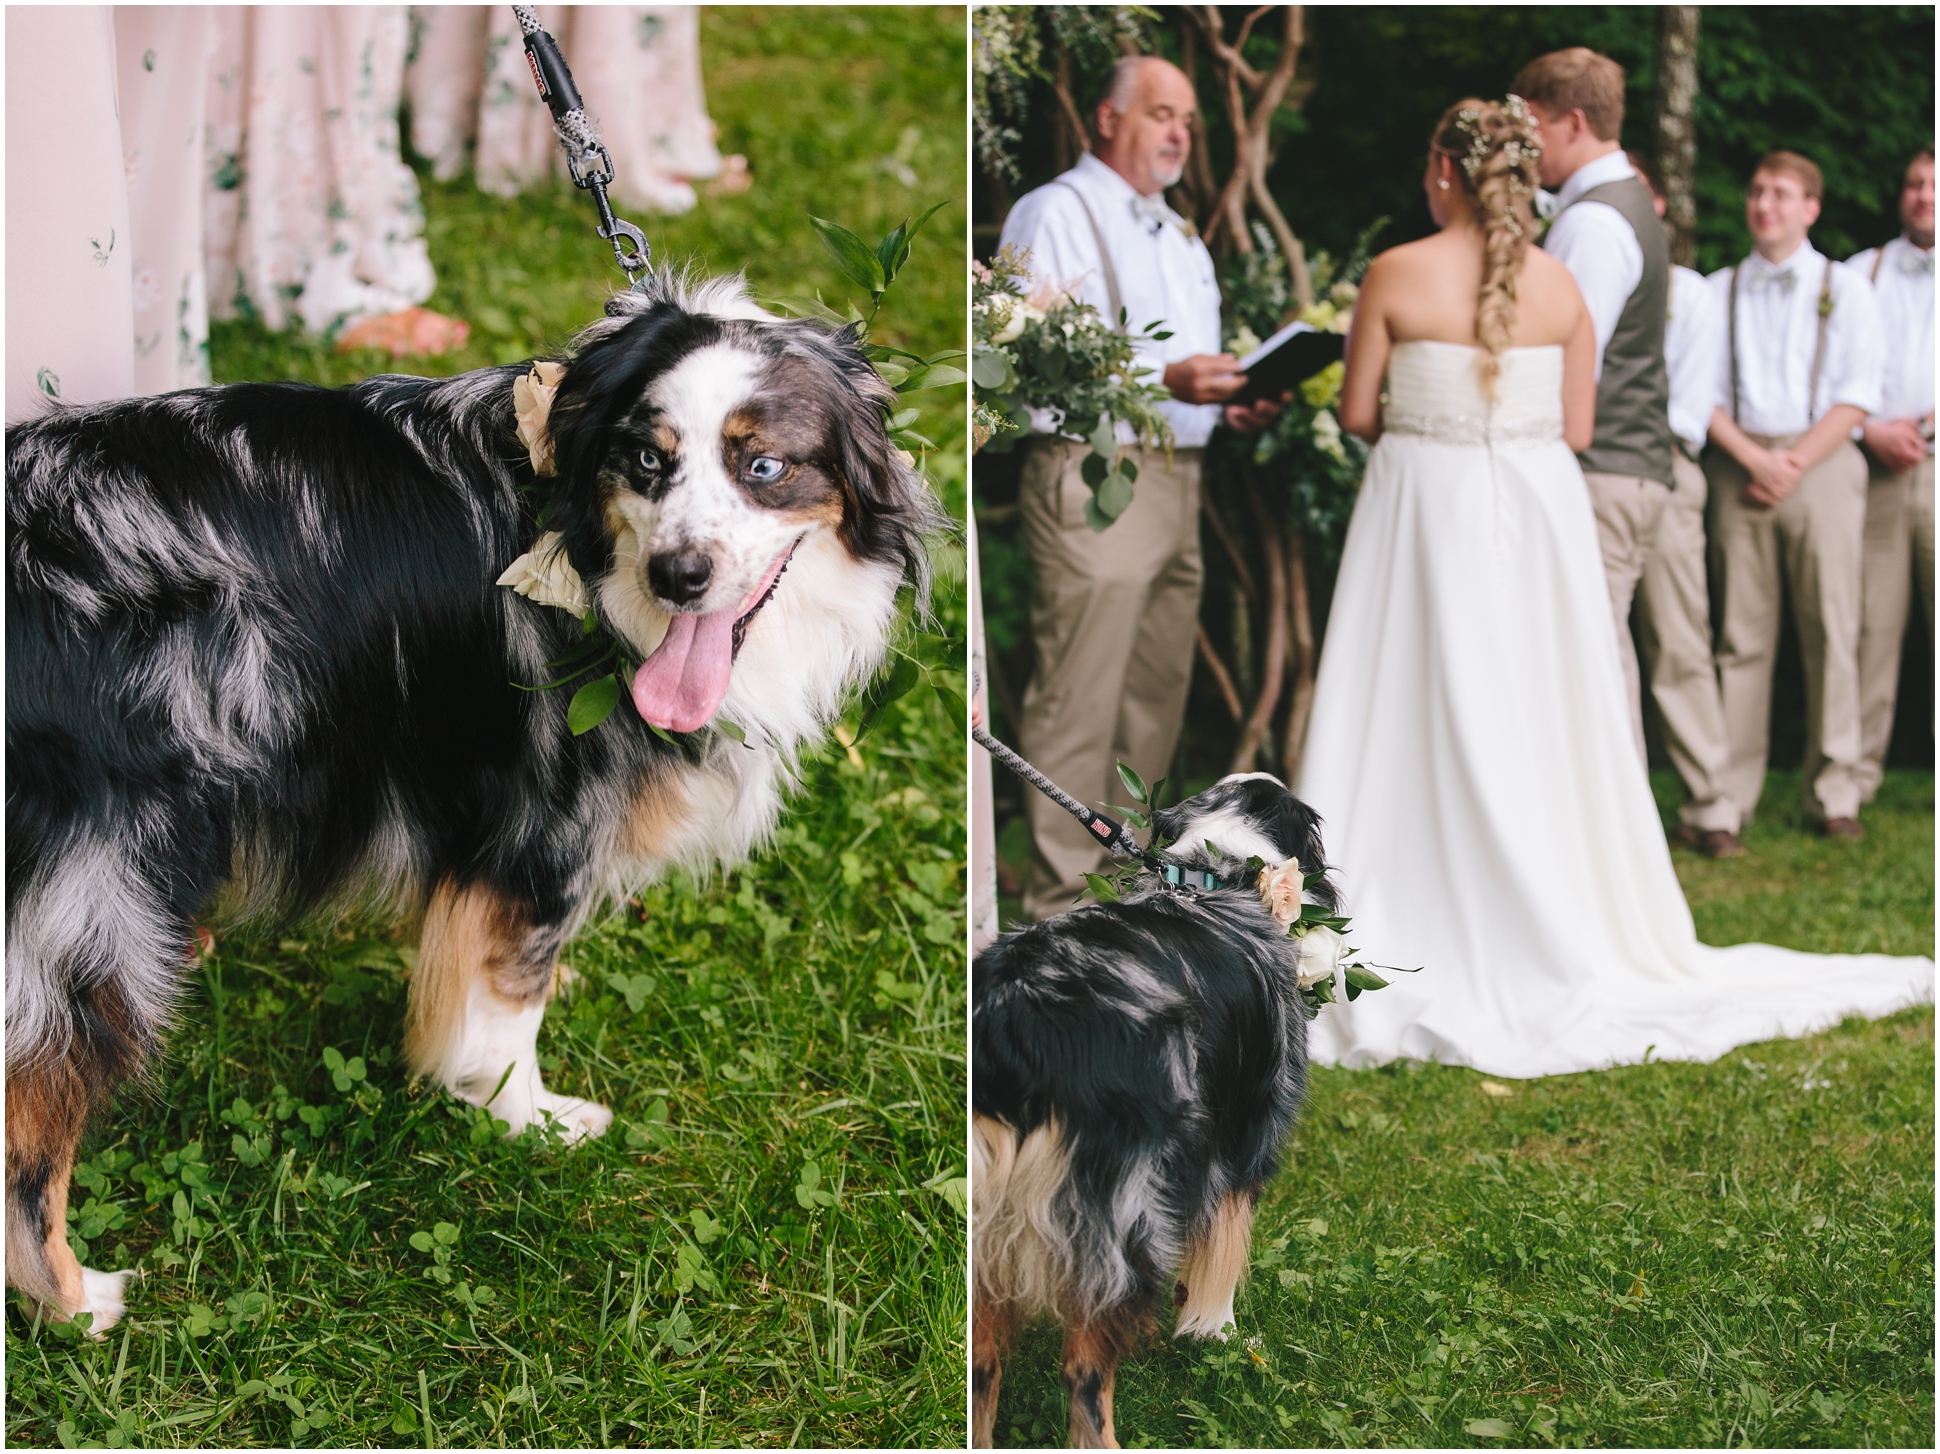 5 Tips For Including Your Dog In Your Wedding | Two Chics Photography | www.twochicsphotography.com